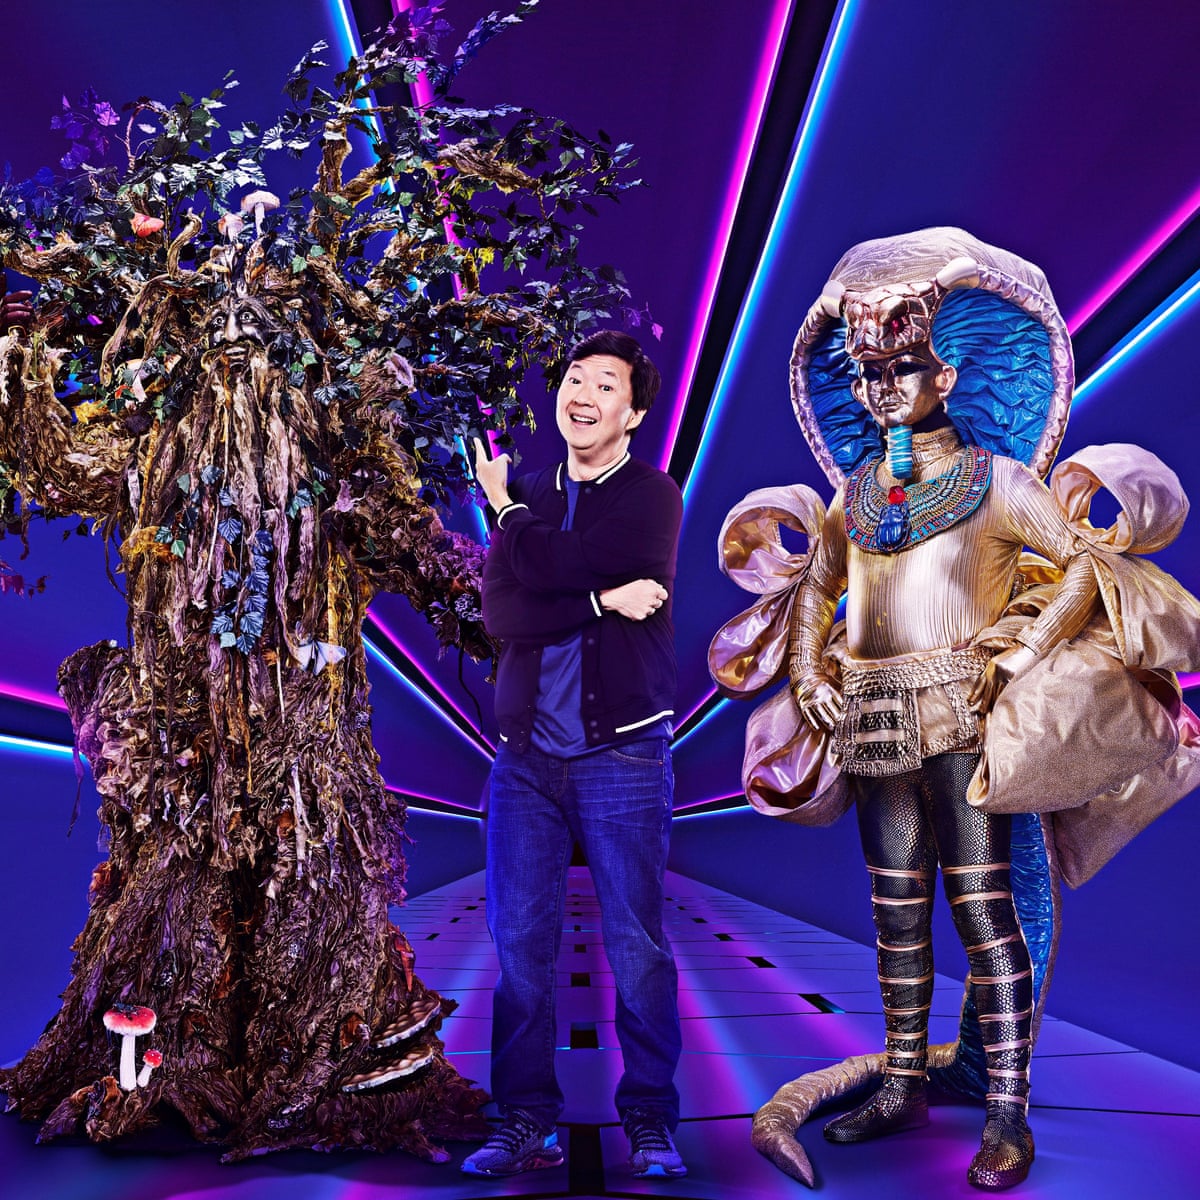 Silly, naff, unmissable! The Masked Singer is a truly terrible delight, Television